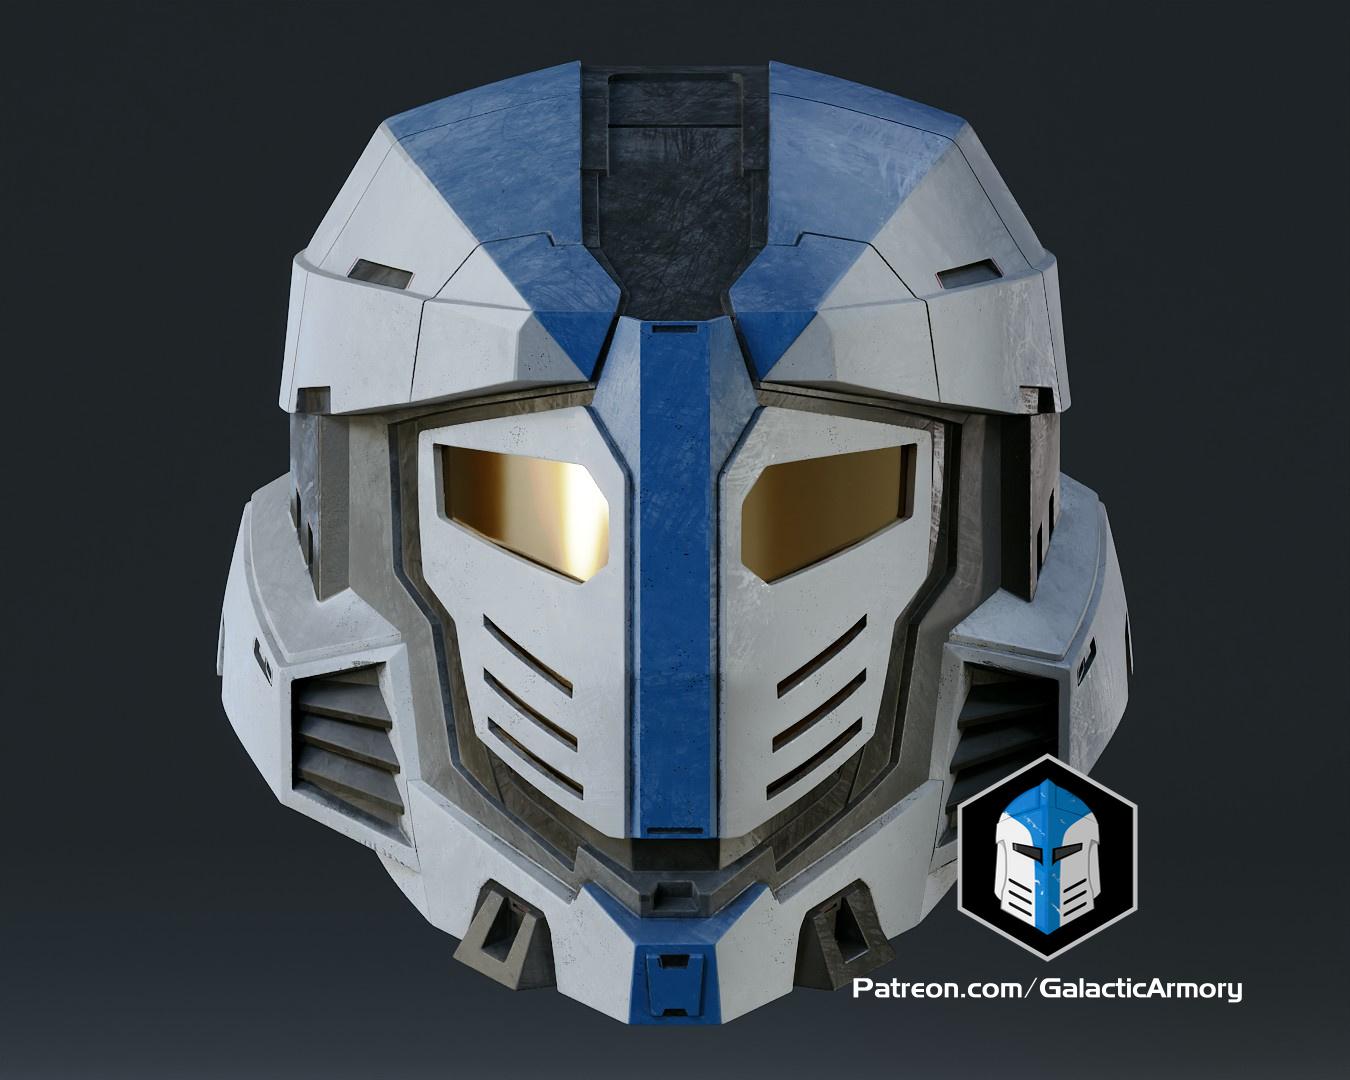 [Free Helmet Download!] A Galactic Armory Spartan helmet is available as a free helmet download!